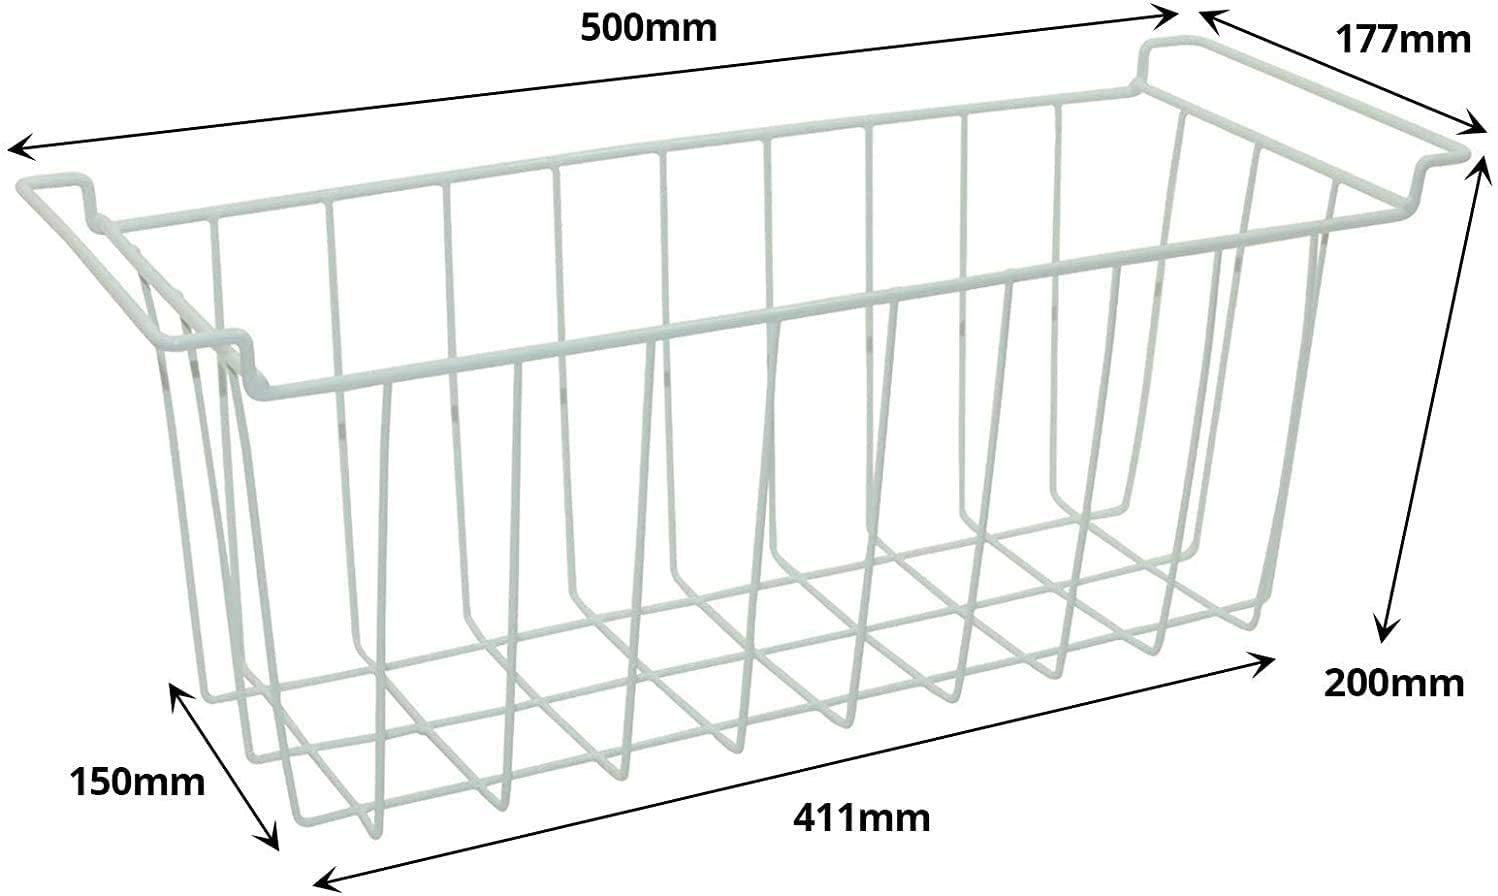 HOTPOINT Basket Cage for Chest Freezer RCNAA30 CHNAA3